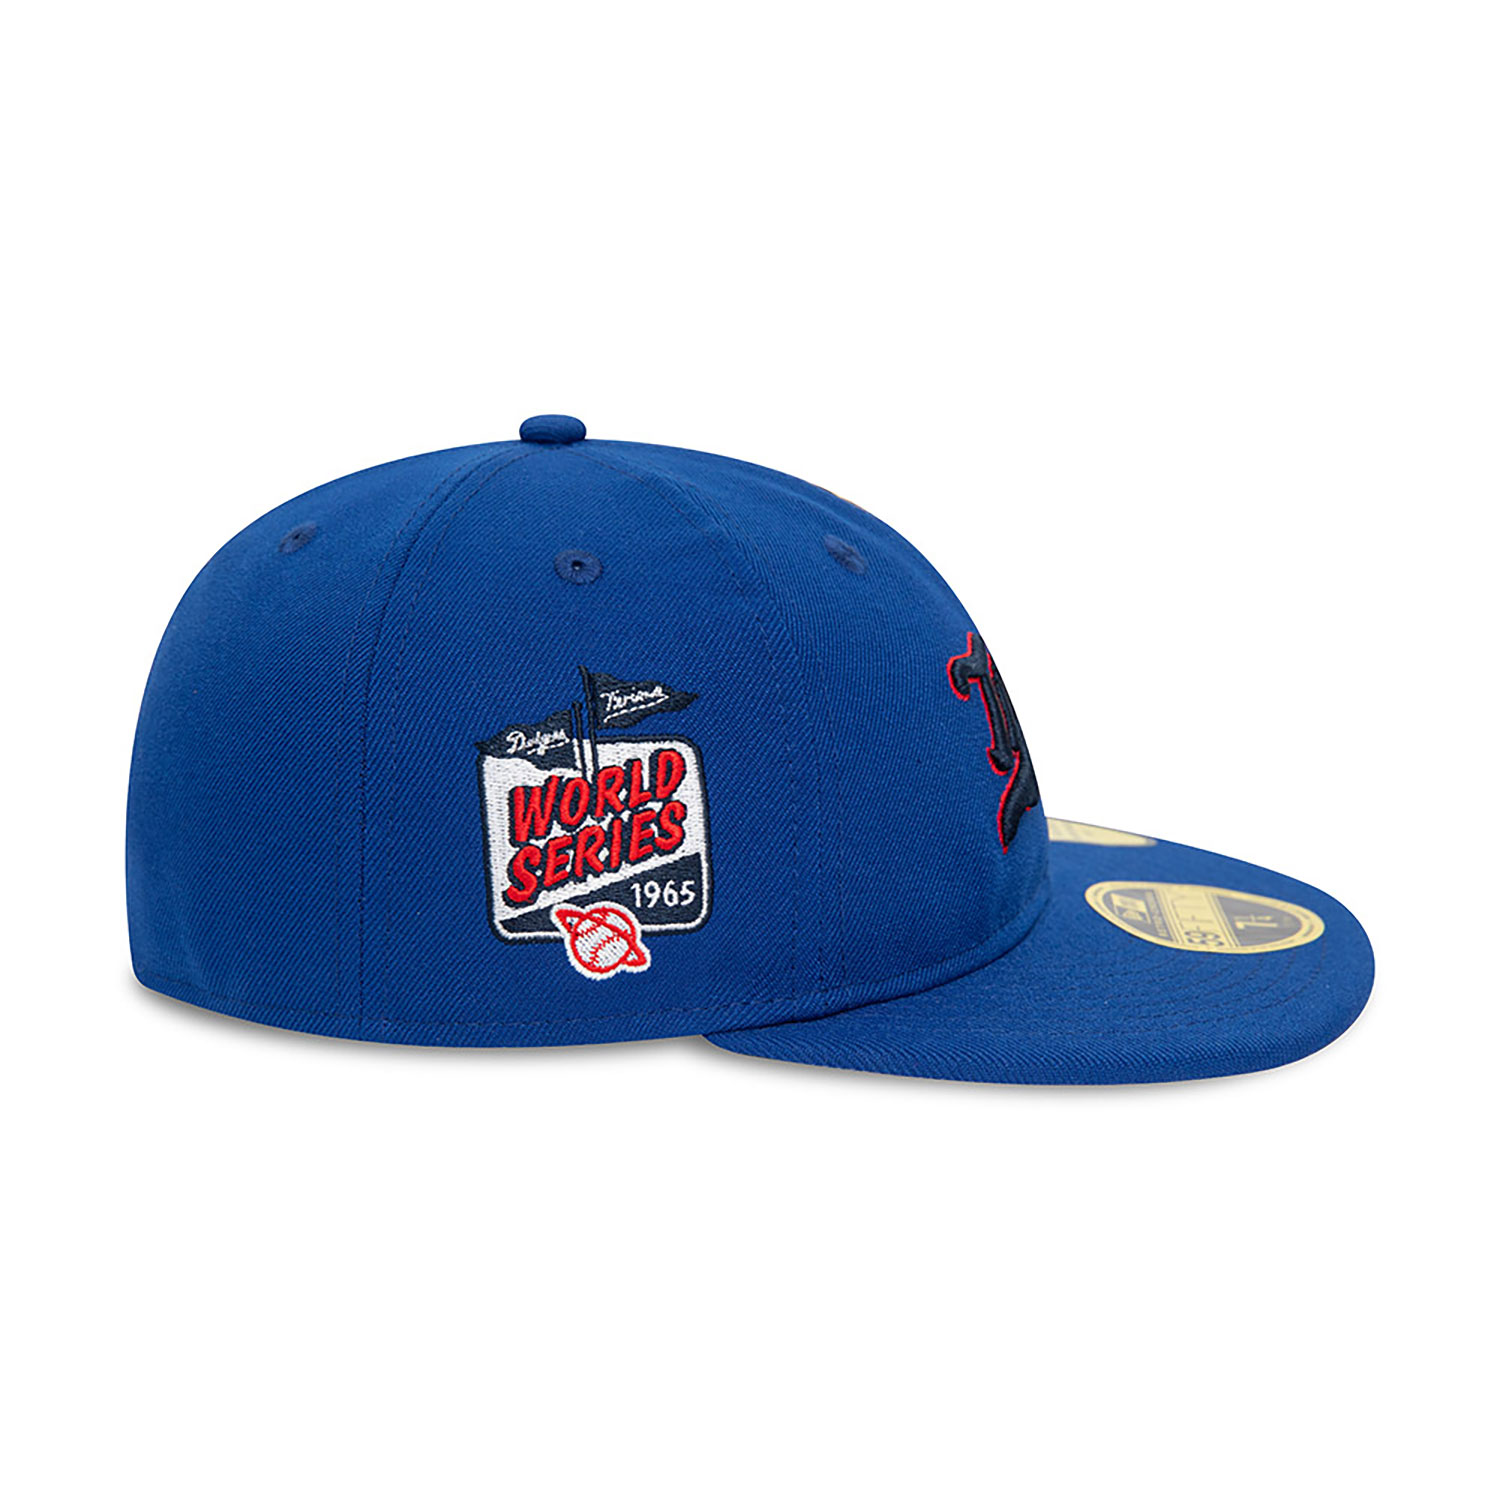 Minnesota Twins MLB Cooperstown Pin Badge Blue 59FIFTY Retro Crown Fitted Cap